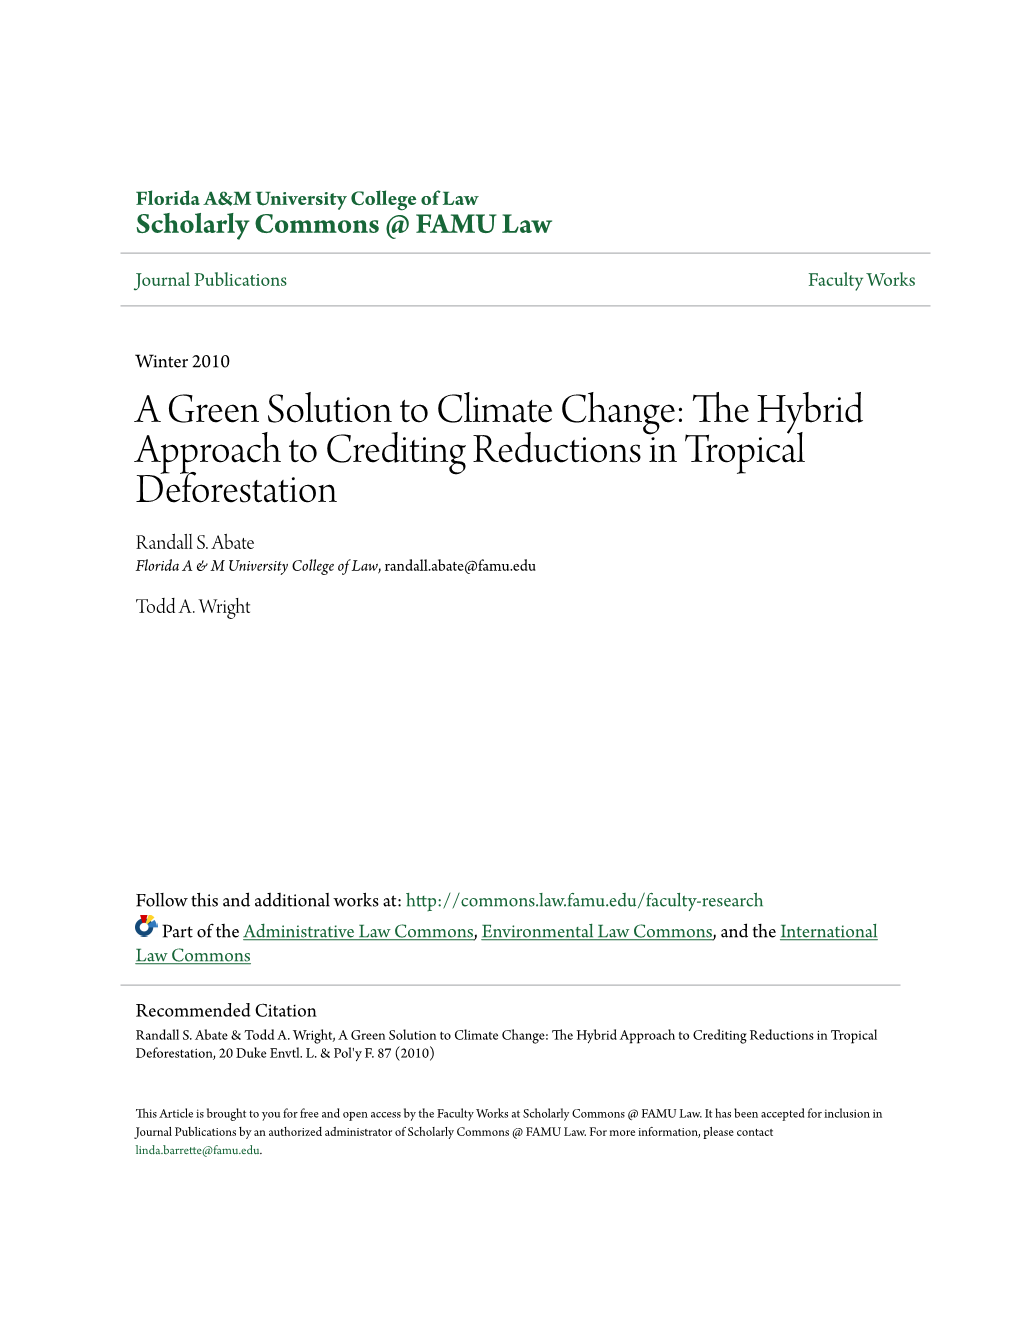 A Green Solution to Climate Change: the Yh Brid Approach to Crediting Reductions in Tropical Deforestation Randall S